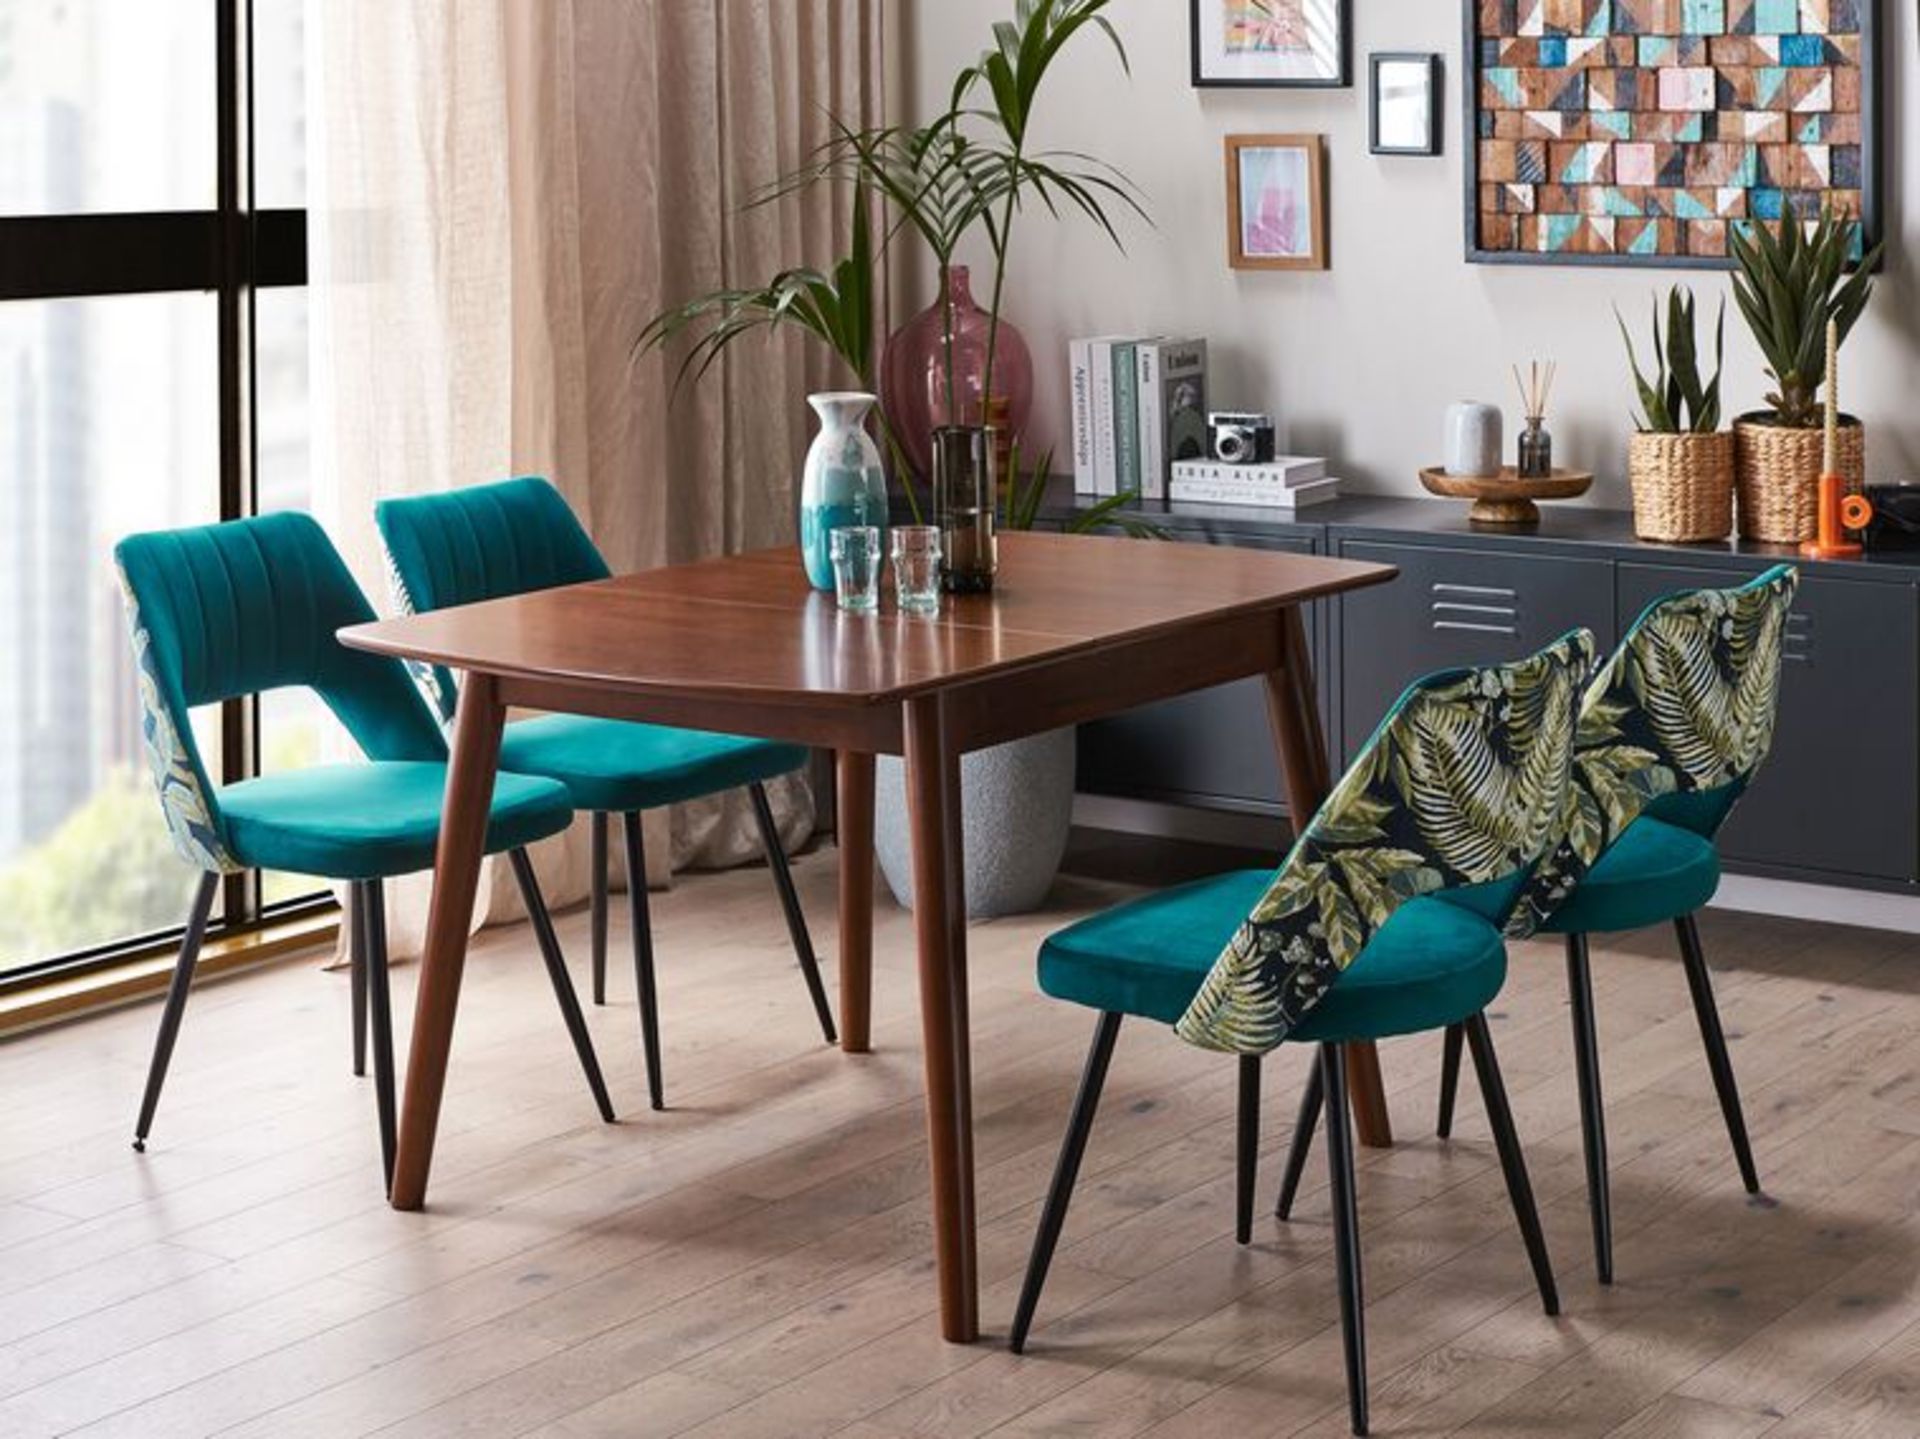 Toms Extending Dining Table 100/130 x 80 cm Dark Wood. - R13a.11. Design your dining corner and - Image 2 of 2